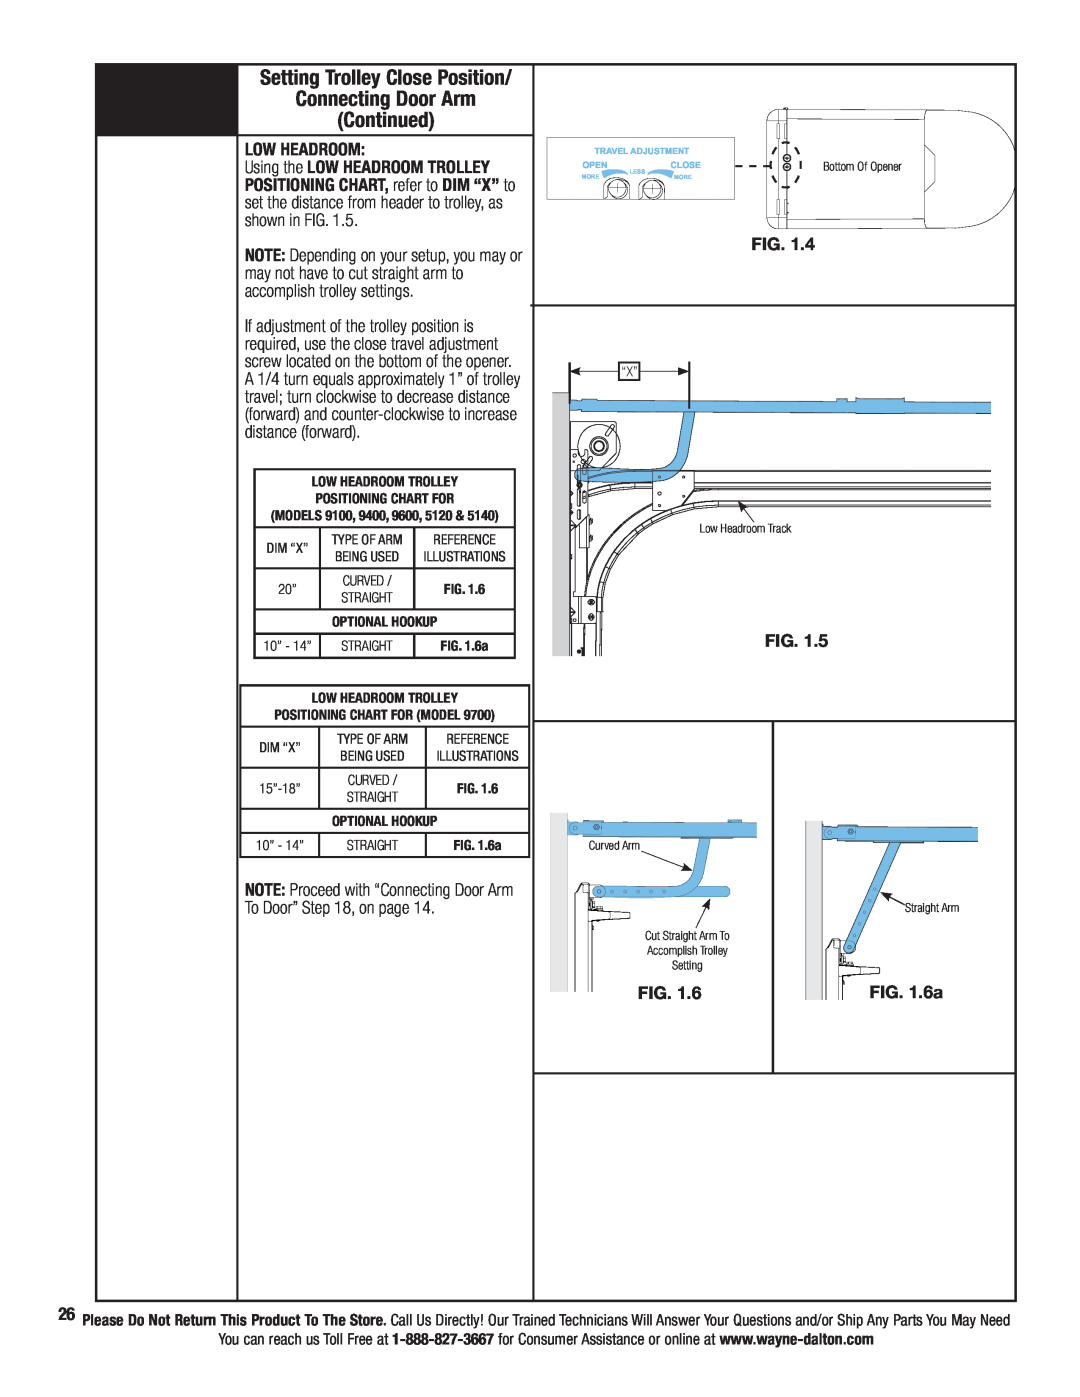 Wayne-Dalton 3324B, 3322B-Z, 3224C-Z, 3222C-Z, 3220C-Z, 3221C-Z, 3320B-Z installation instructions 6a 